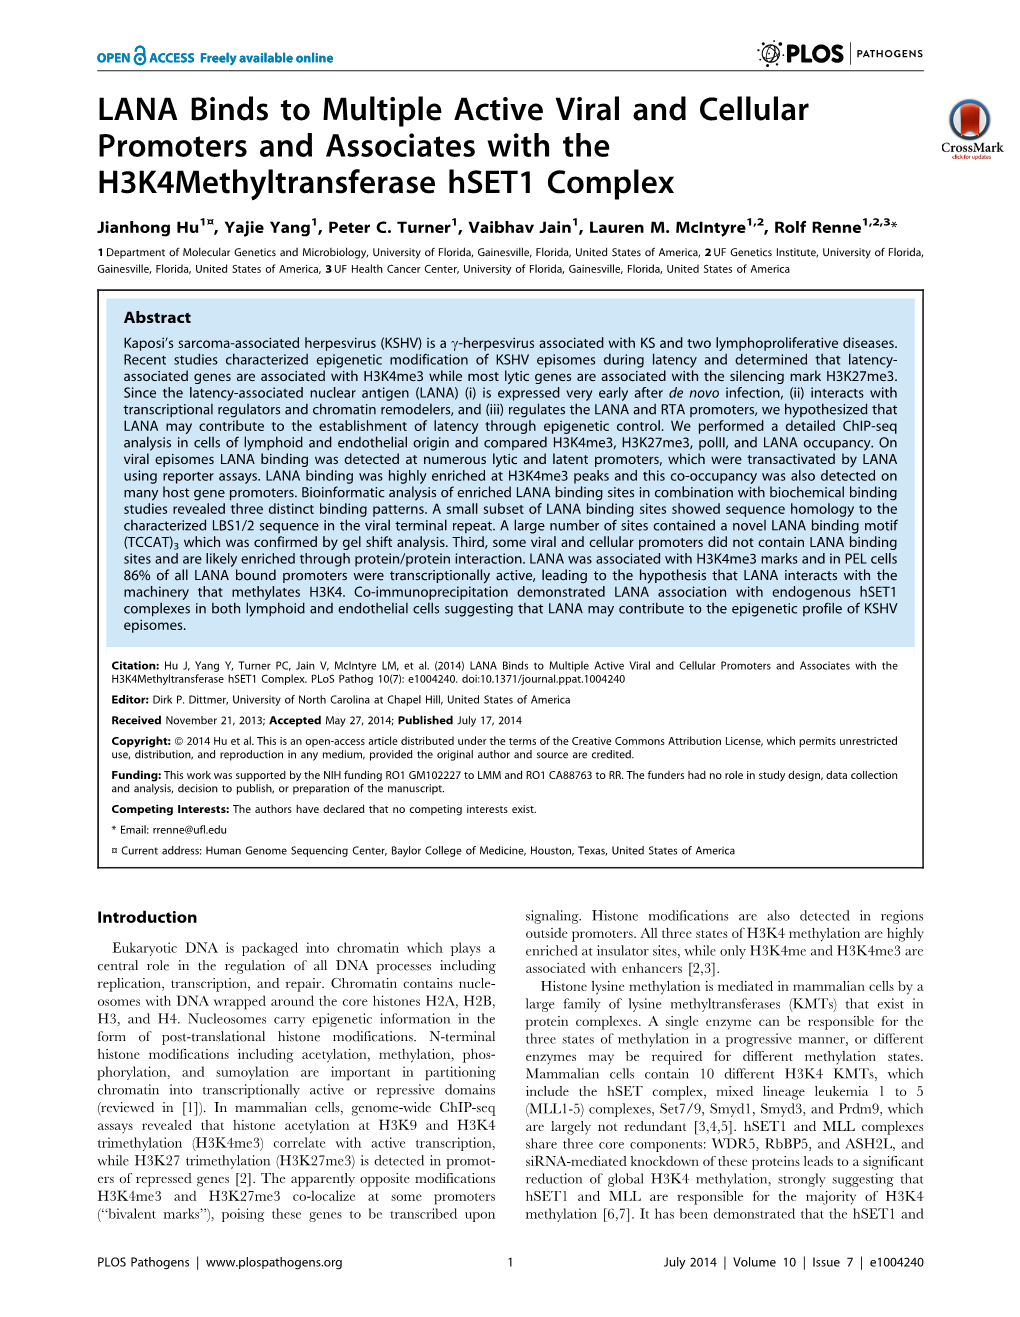 LANA Binds to Multiple Active Viral and Cellular Promoters and Associates with the H3k4methyltransferase Hset1 Complex